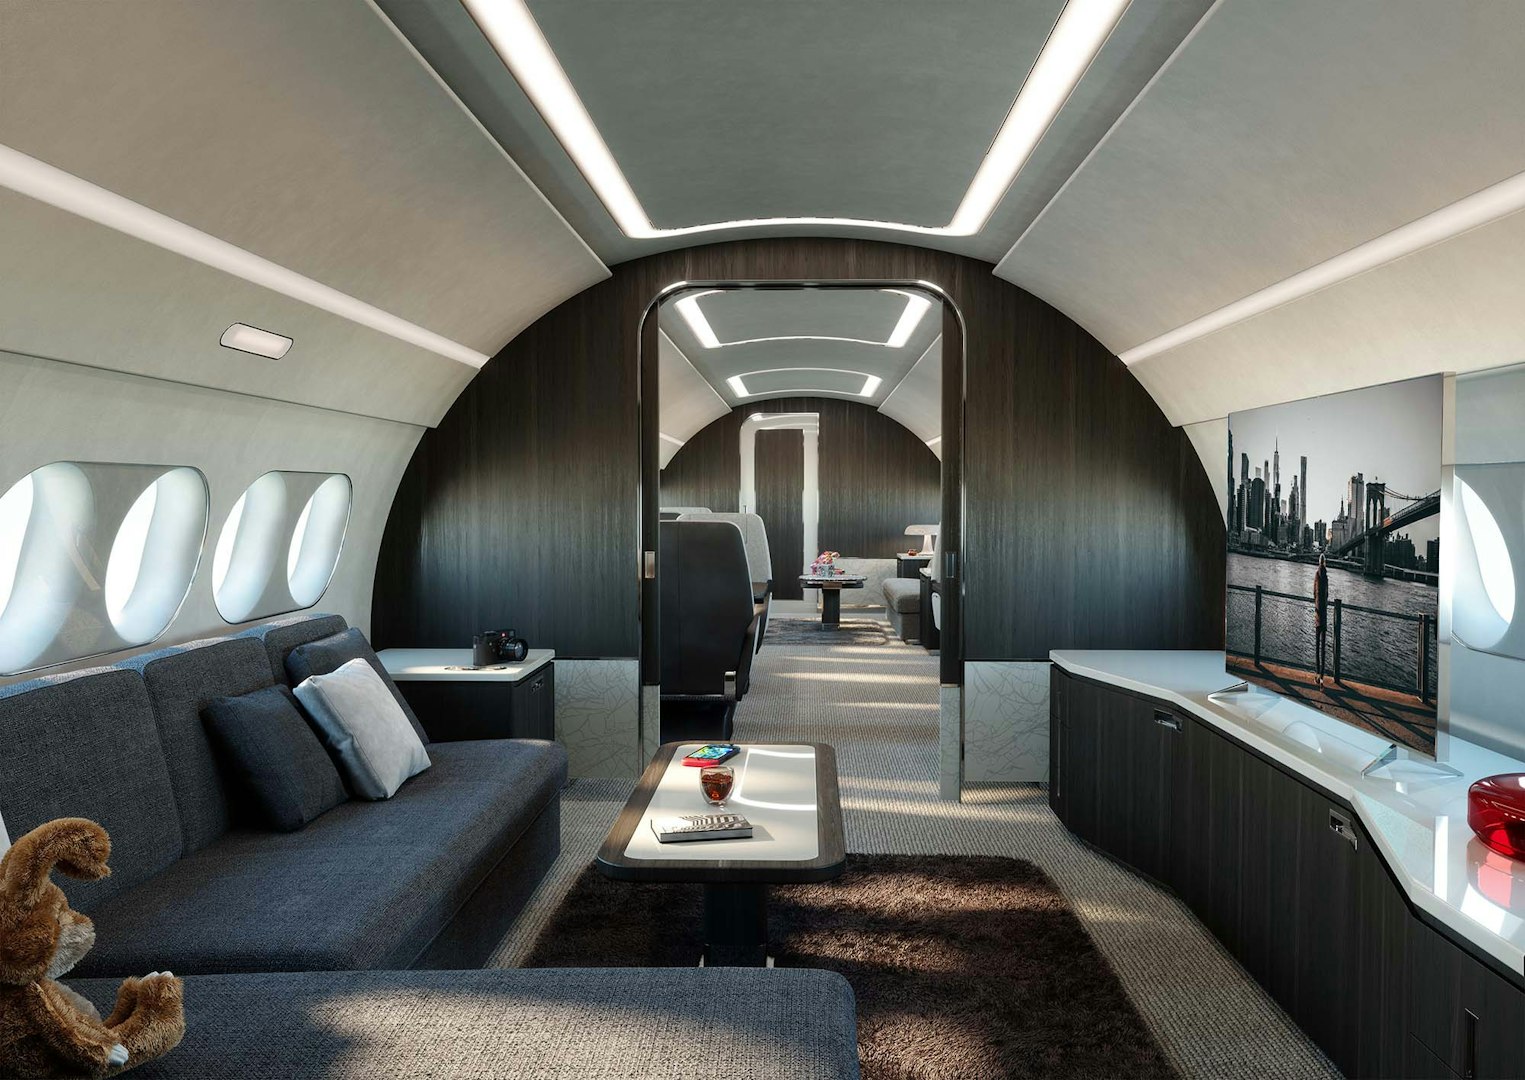 The ACJ TwoTwenty: Reimagine Your Place in the Sky